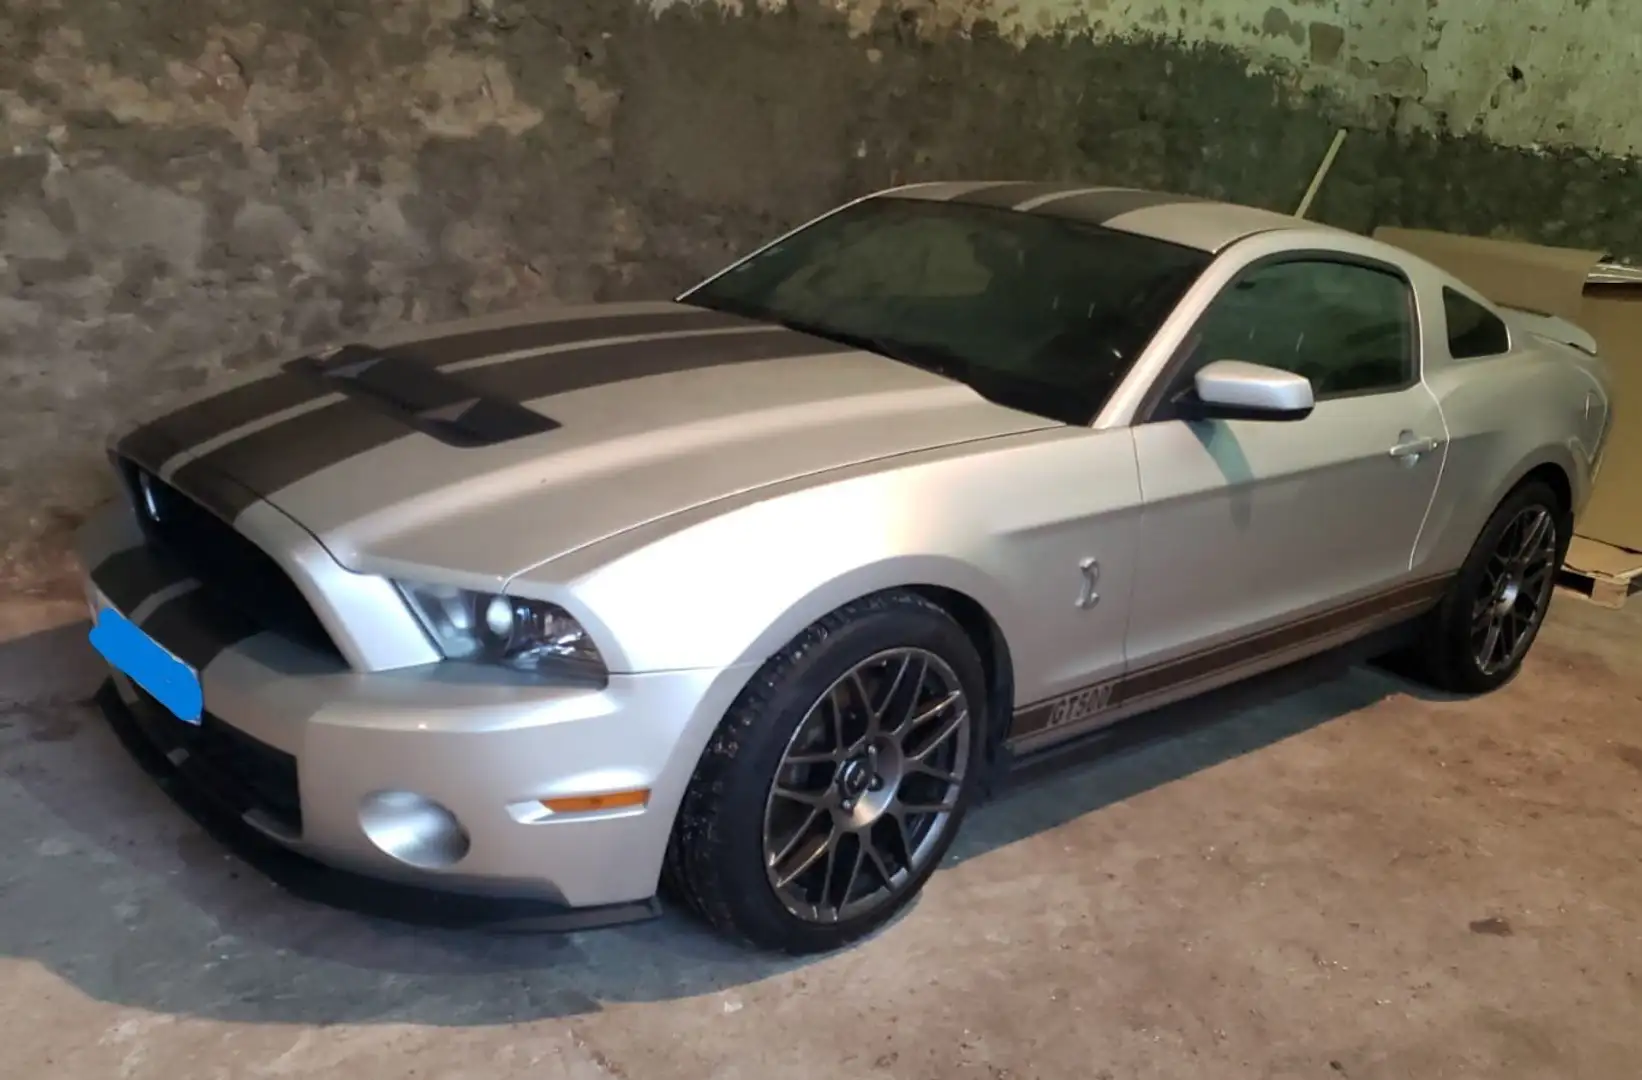 Ford Mustang GT 500 Shelby 2012 v8 5.4L Argent - 1